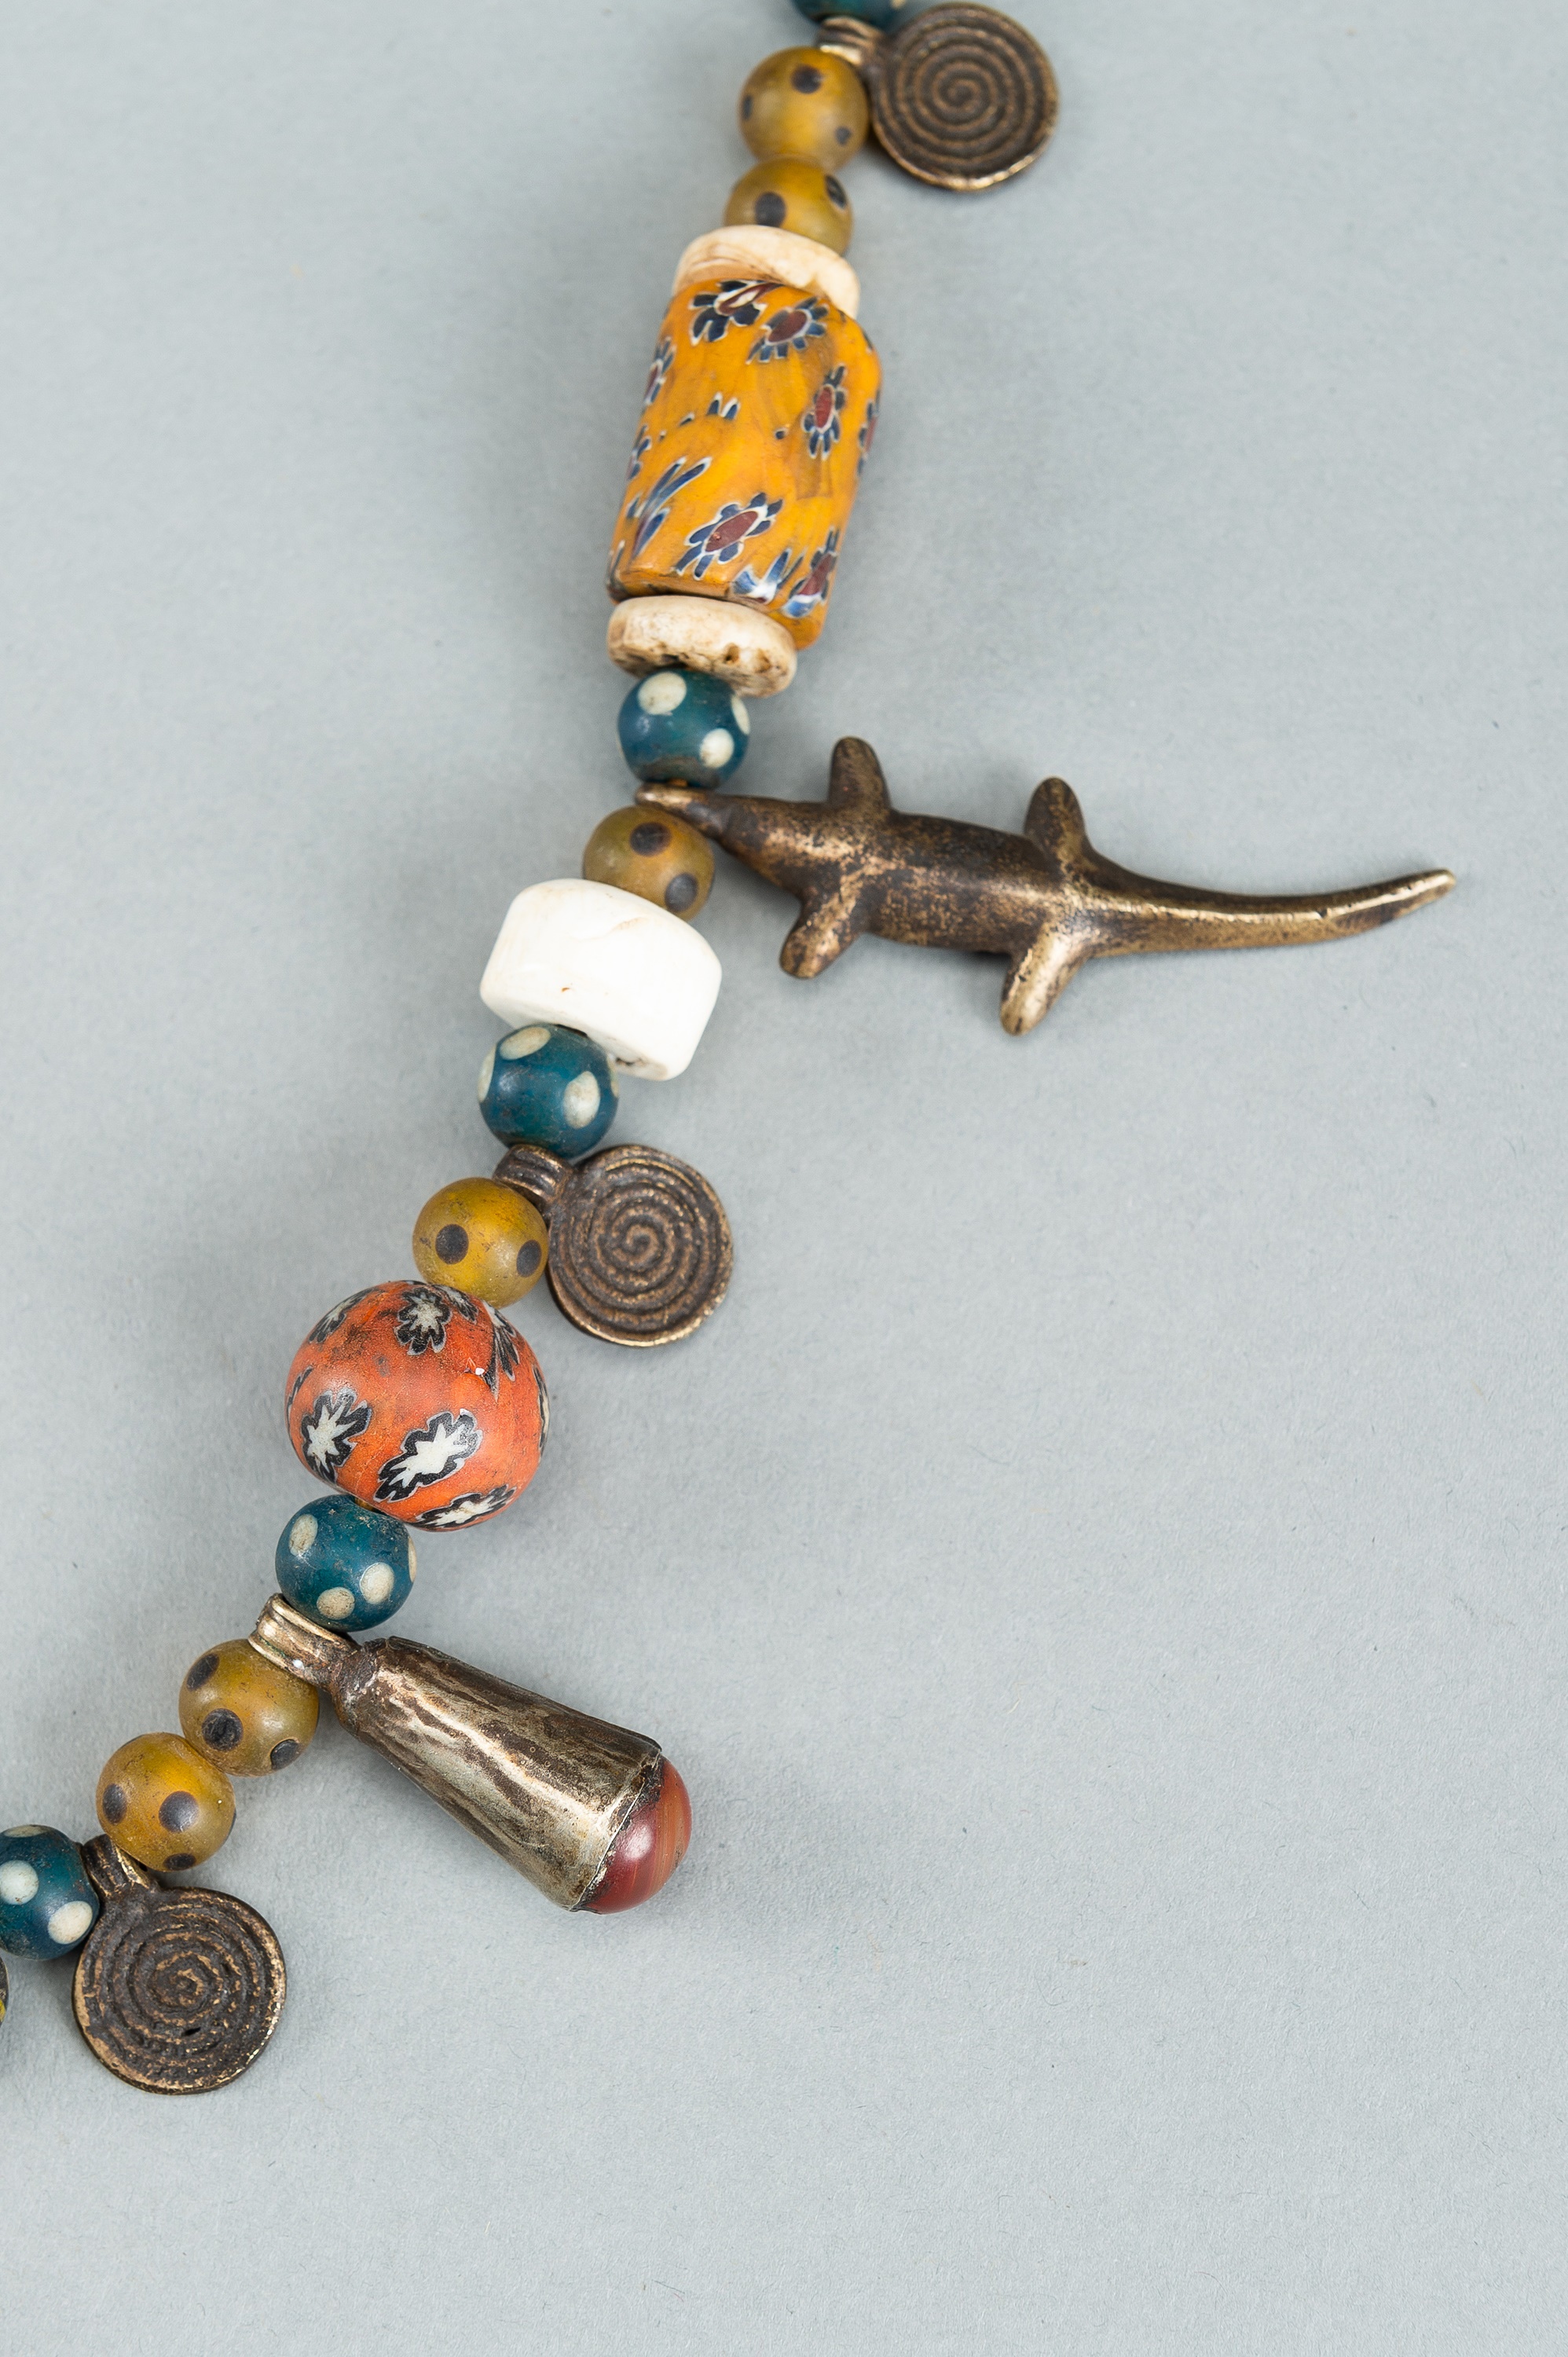 A NAGALAND MULTI-COLORED GLASS, BRASS AND SHELL NECKLACE, c. 1900s - Image 5 of 17